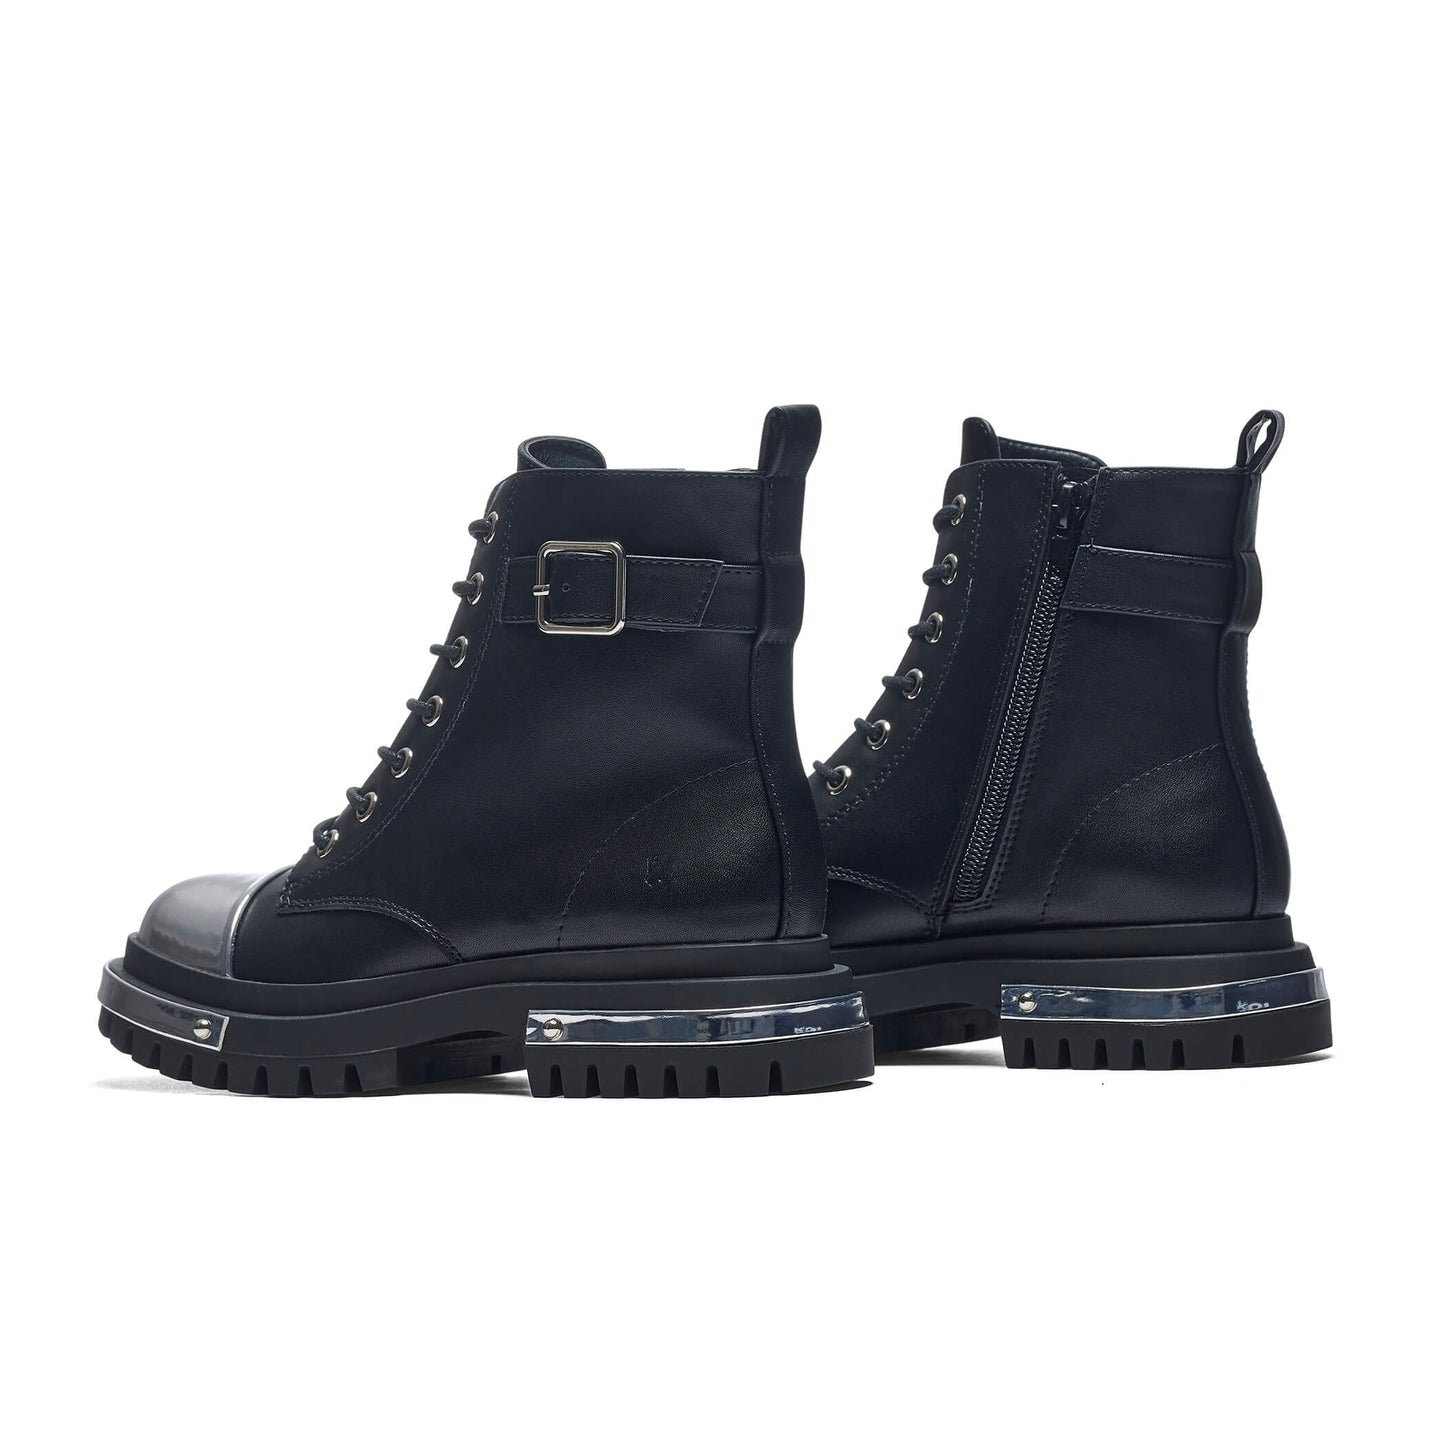 Lil’ Borin Hardware Boots - Ankle Boots - KOI Footwear - Black - BackSide View